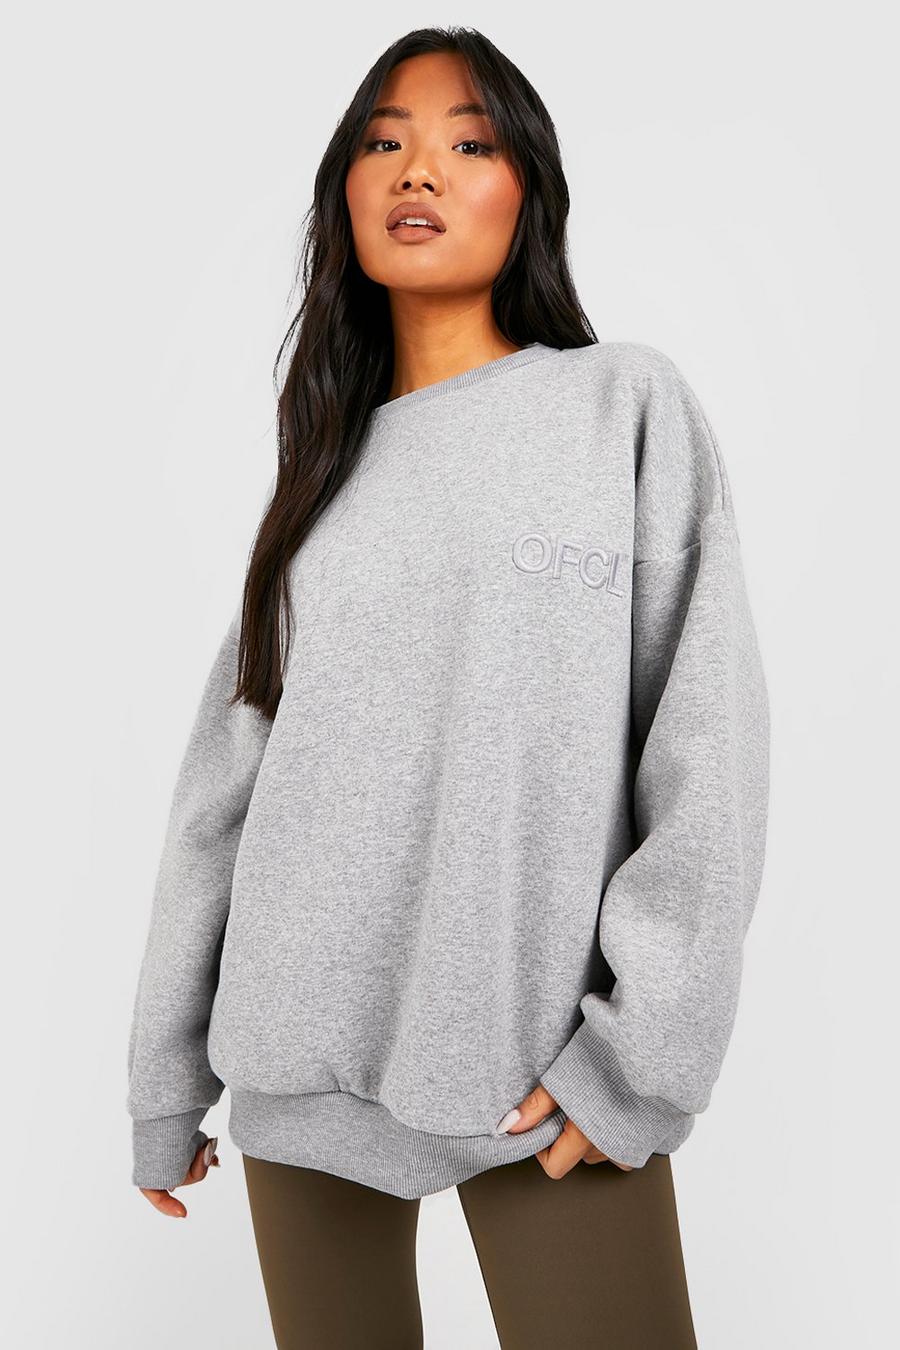 Grey gris Petite Ofcl Embroidered Sweatshirt